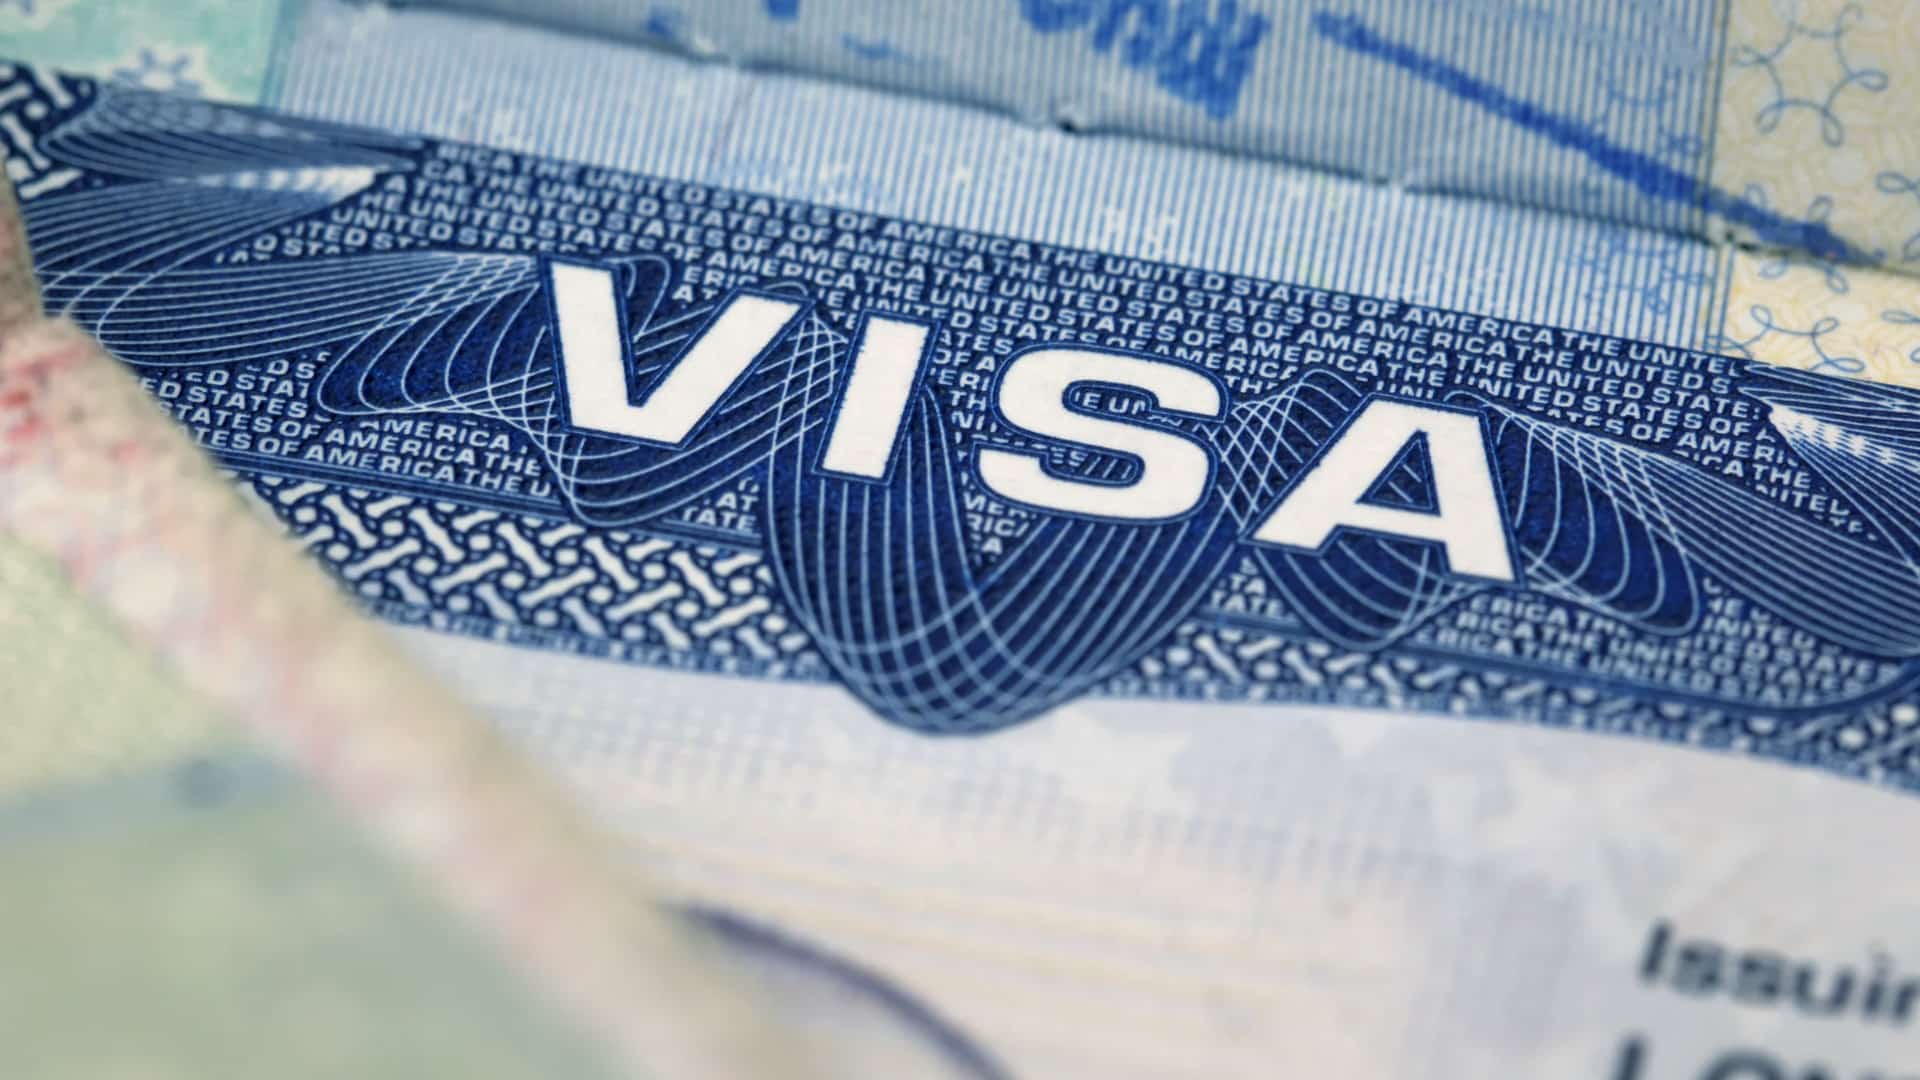 US cannot stop issuing visas during travel bans, federal judge rules